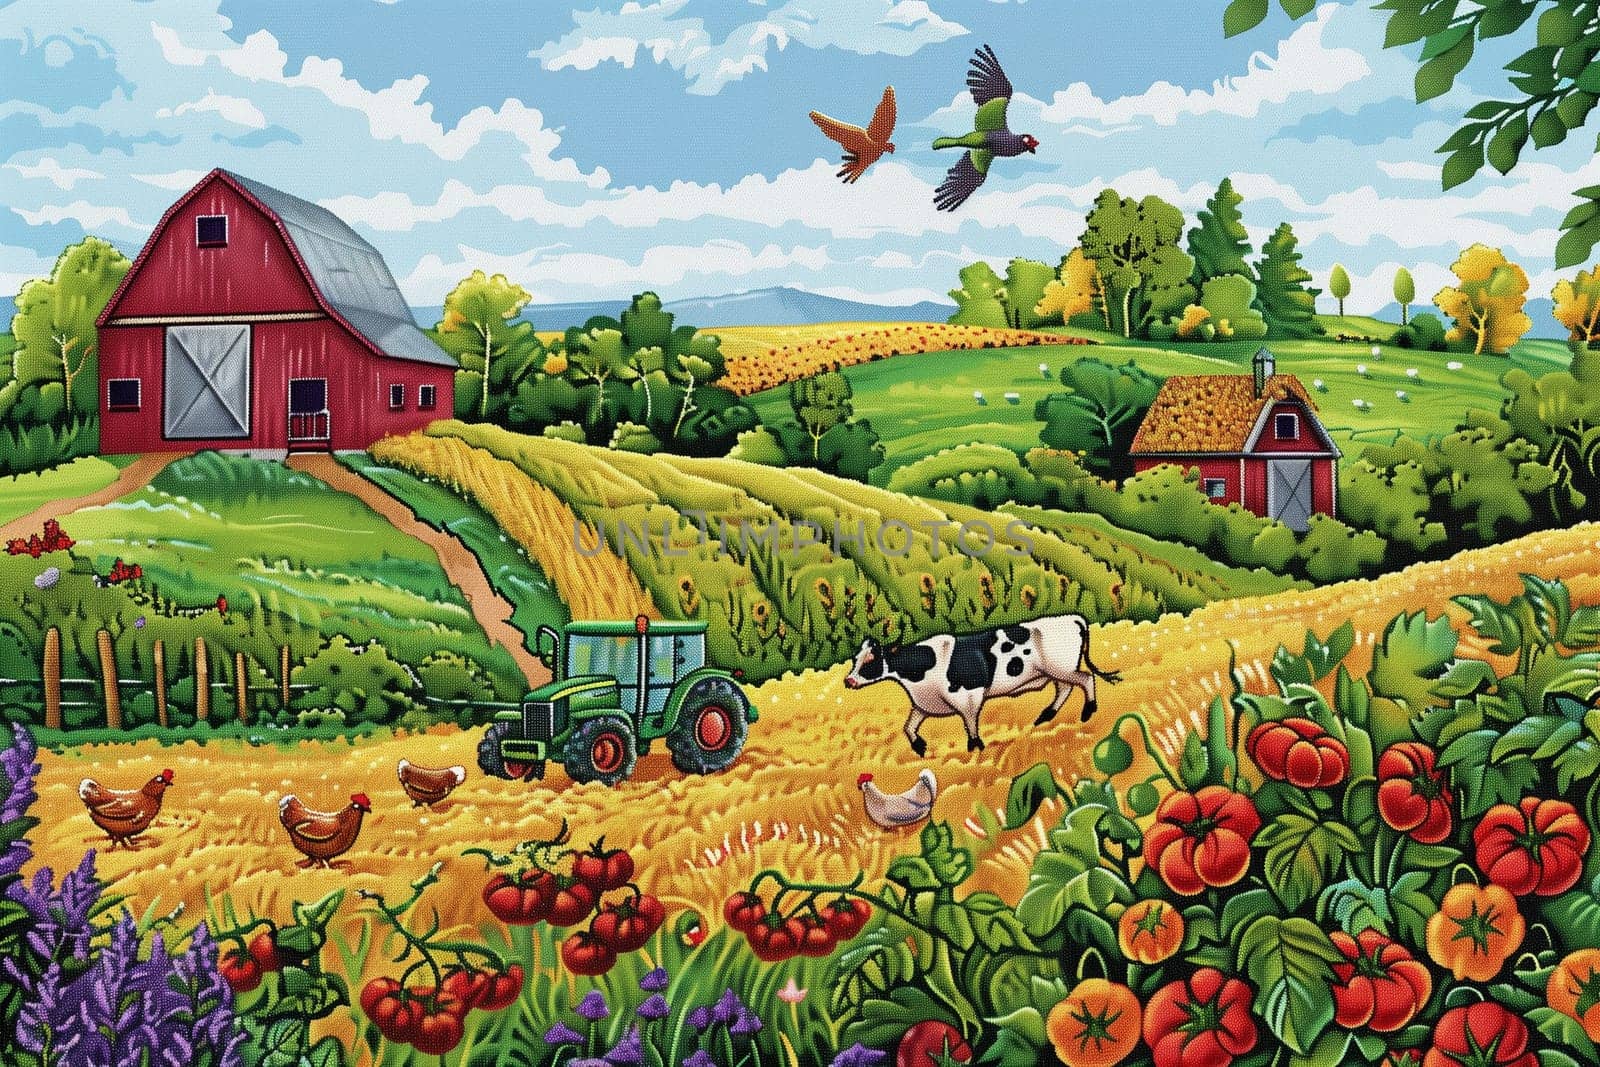 A realistic painting depicting a busy farm scene. A red tractor is in the foreground, with chickens pecking around. The background shows fields and a barn.